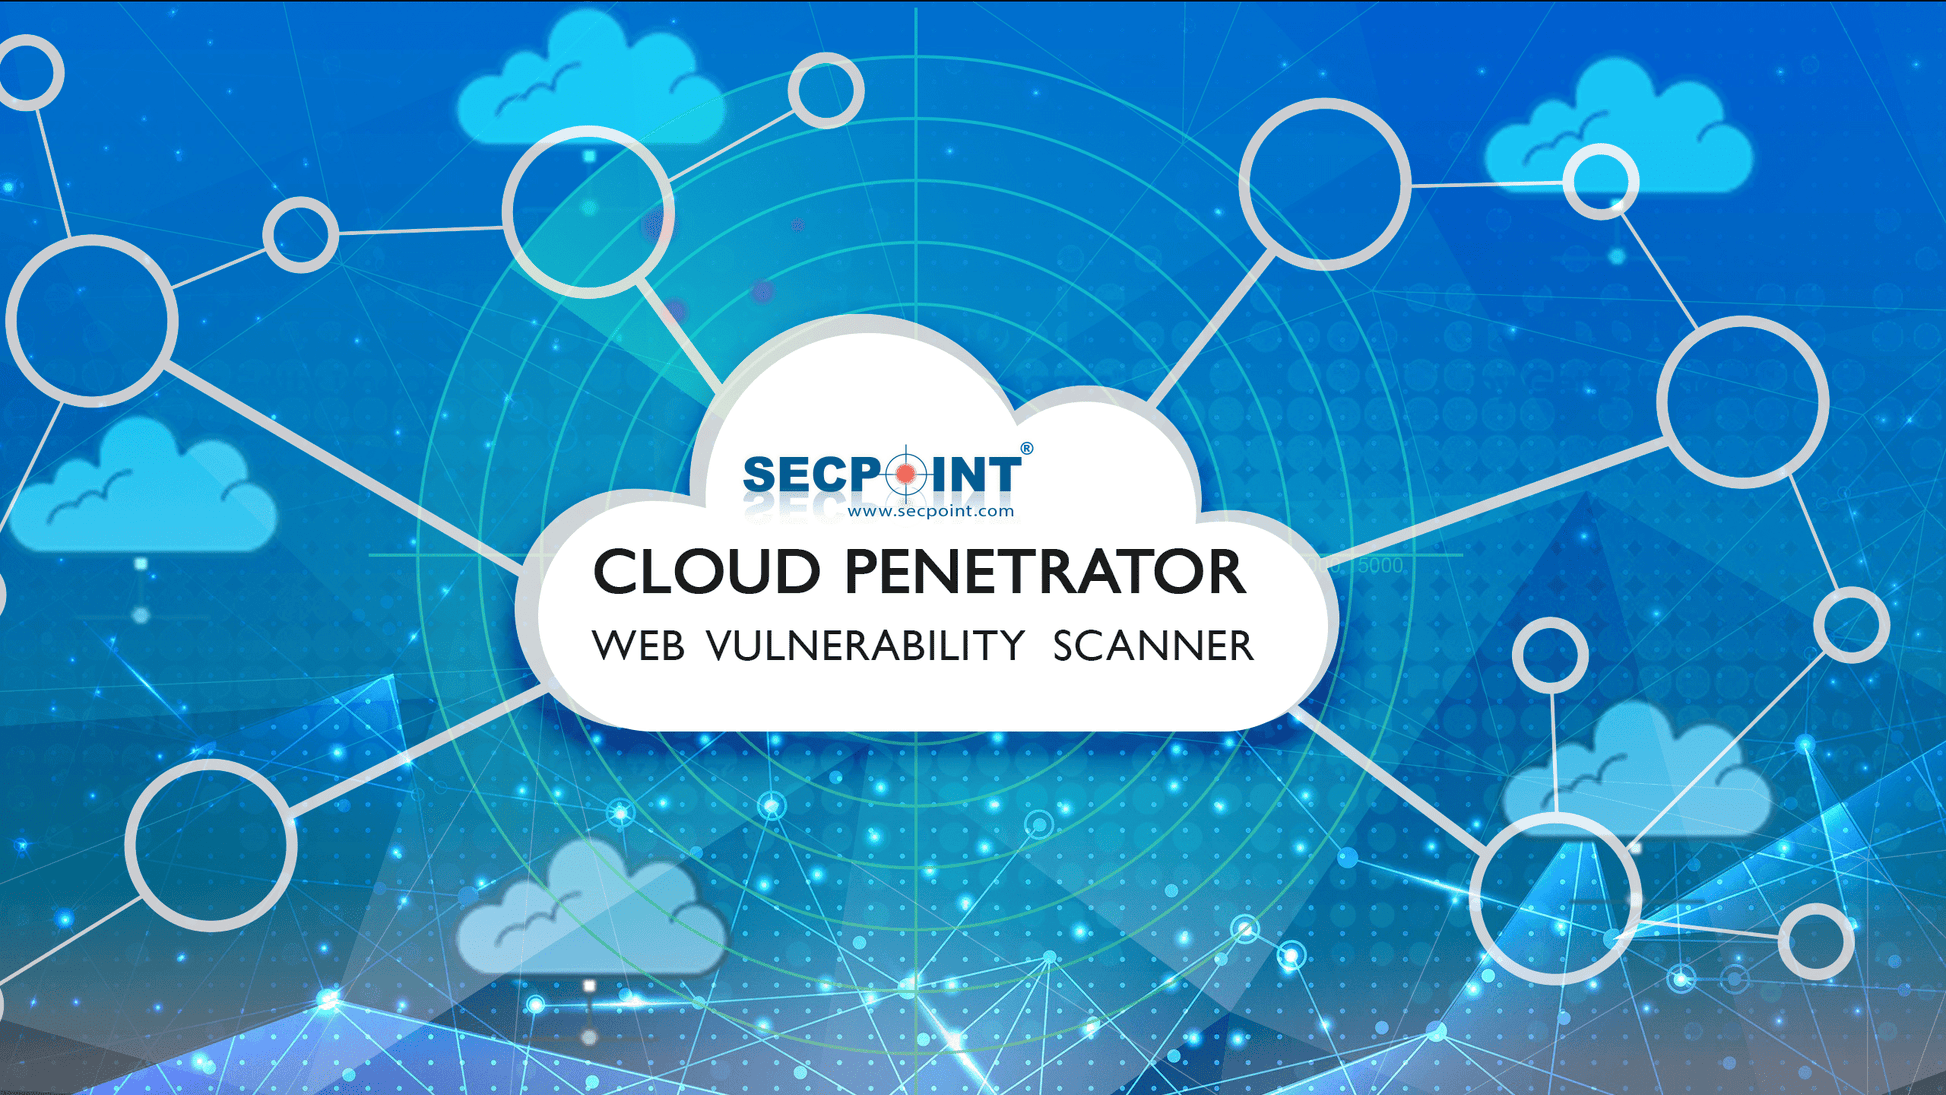 SecPoint Cloud Penetrator S9 - Vulnerability Scanning of 8 IPs for 1 Year Static Scan License - SecPoint